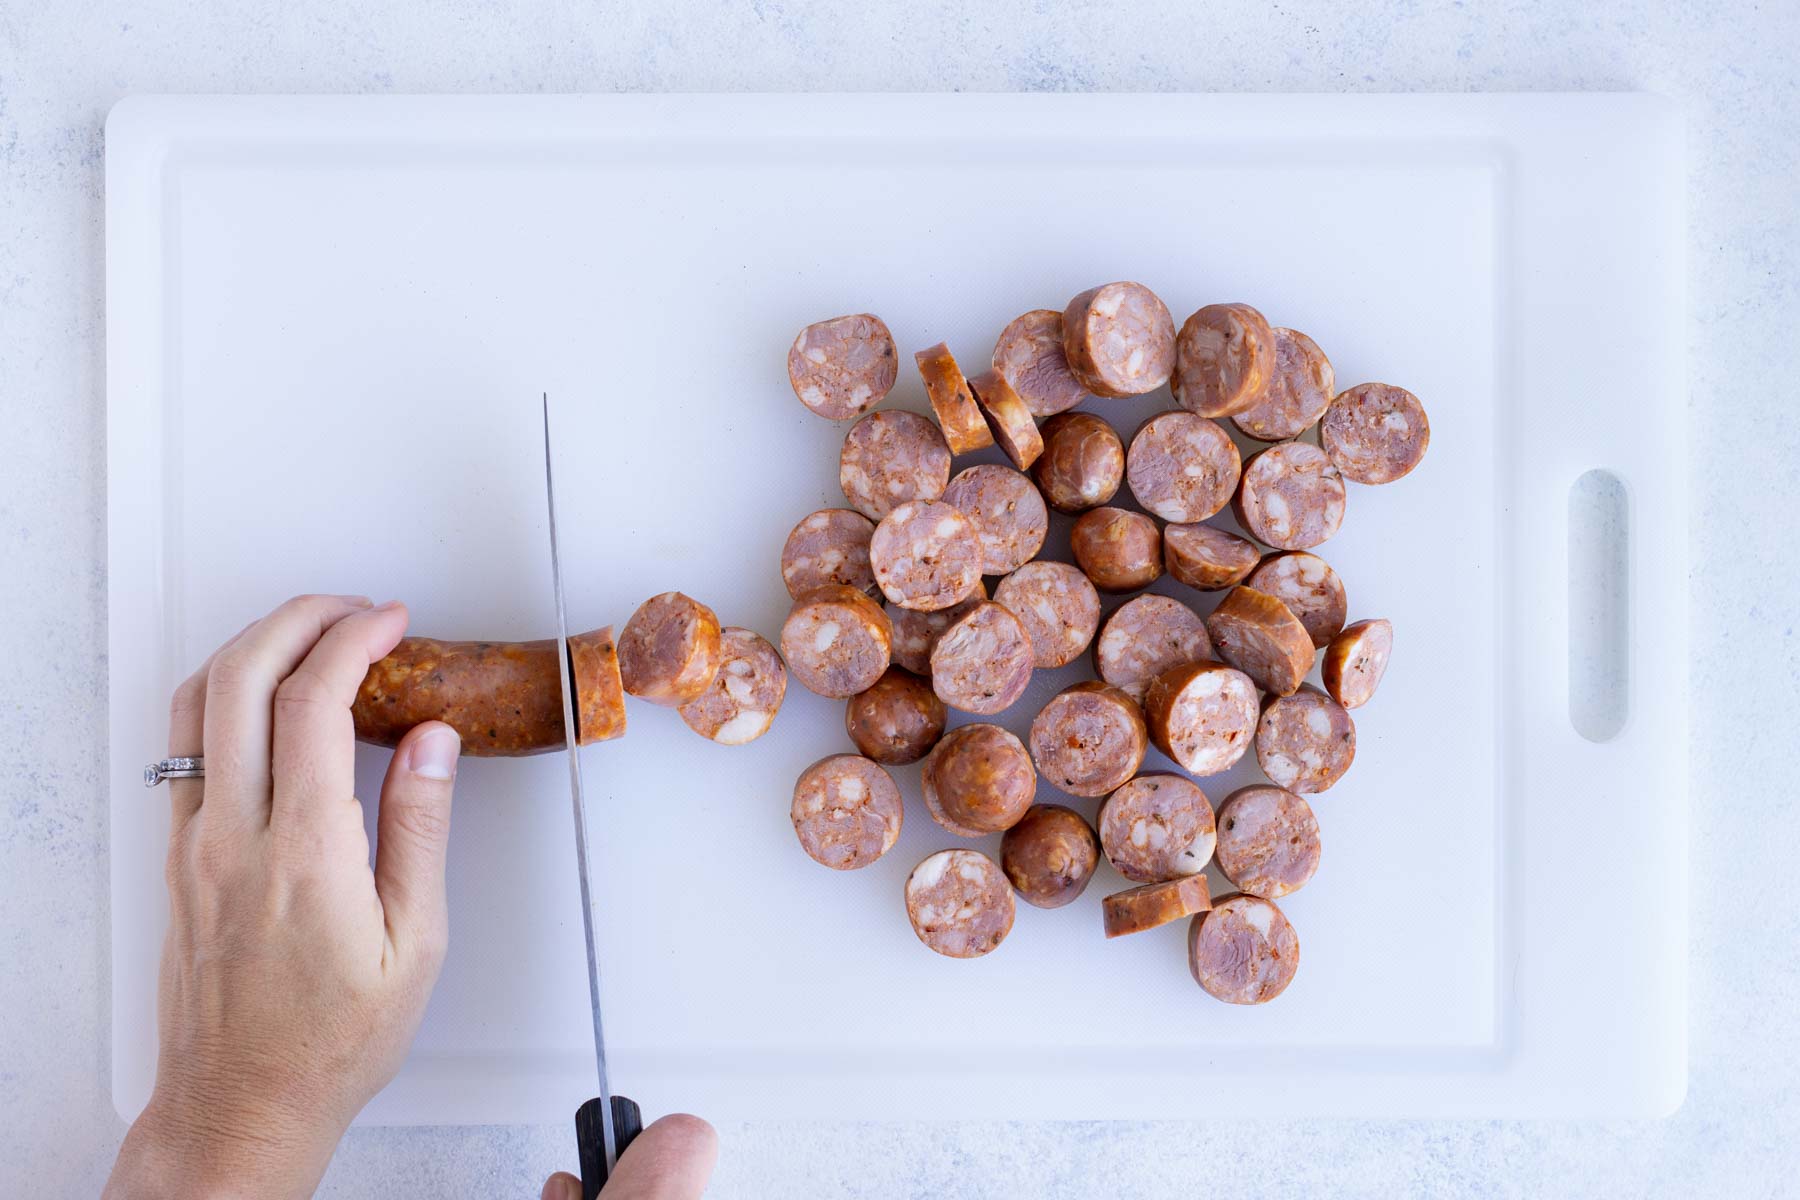 Sausage is cut into pieces on a cutting board.